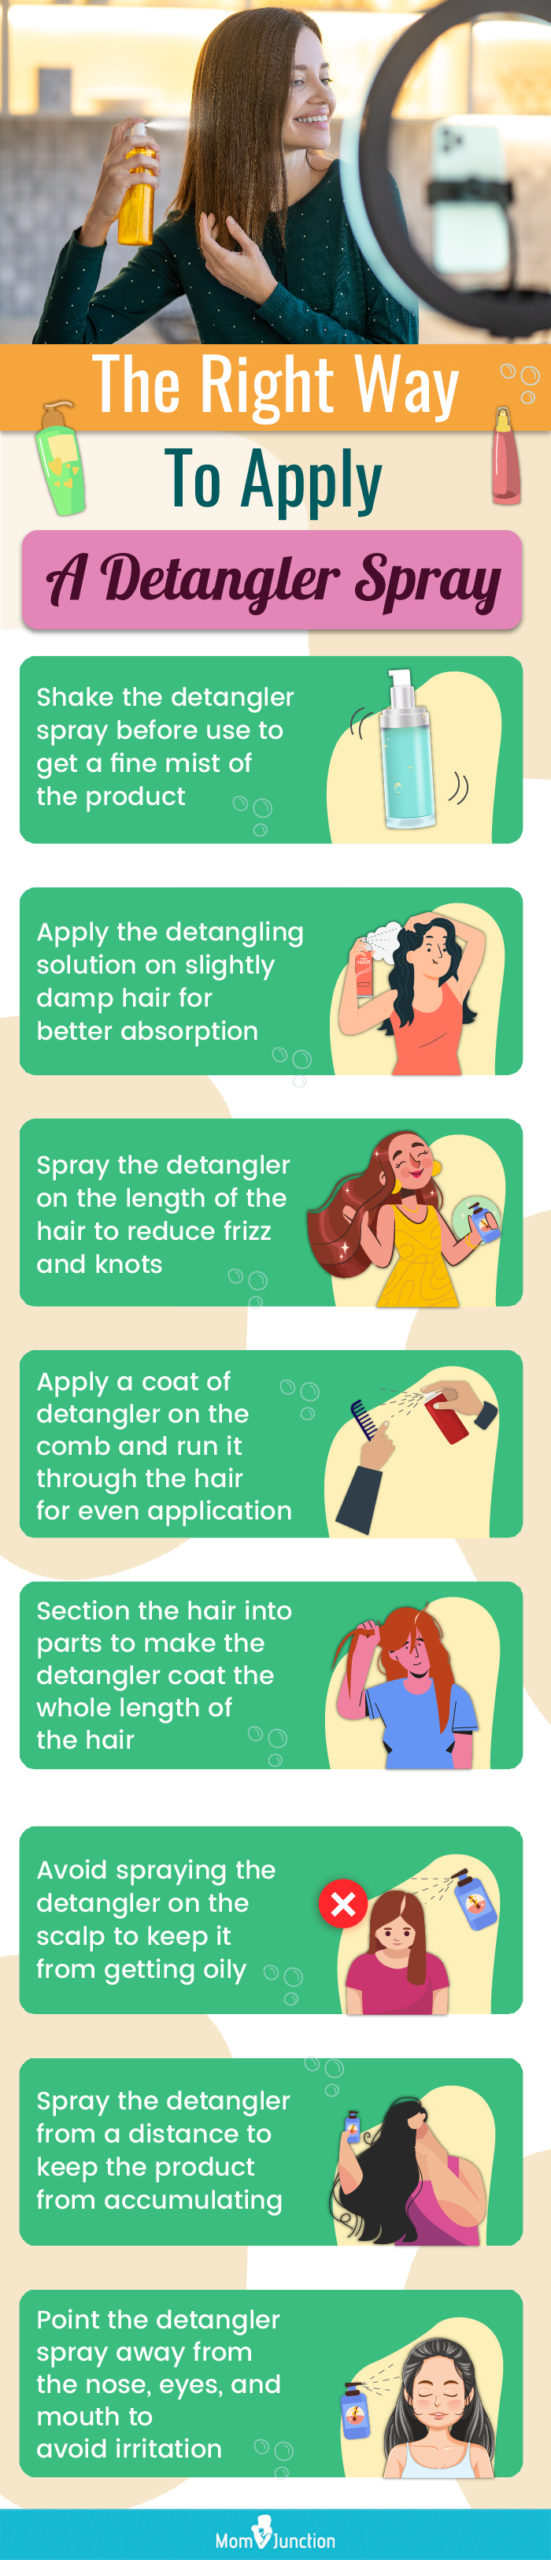 The Right Way To Apply A Detangler Spray (infographic)